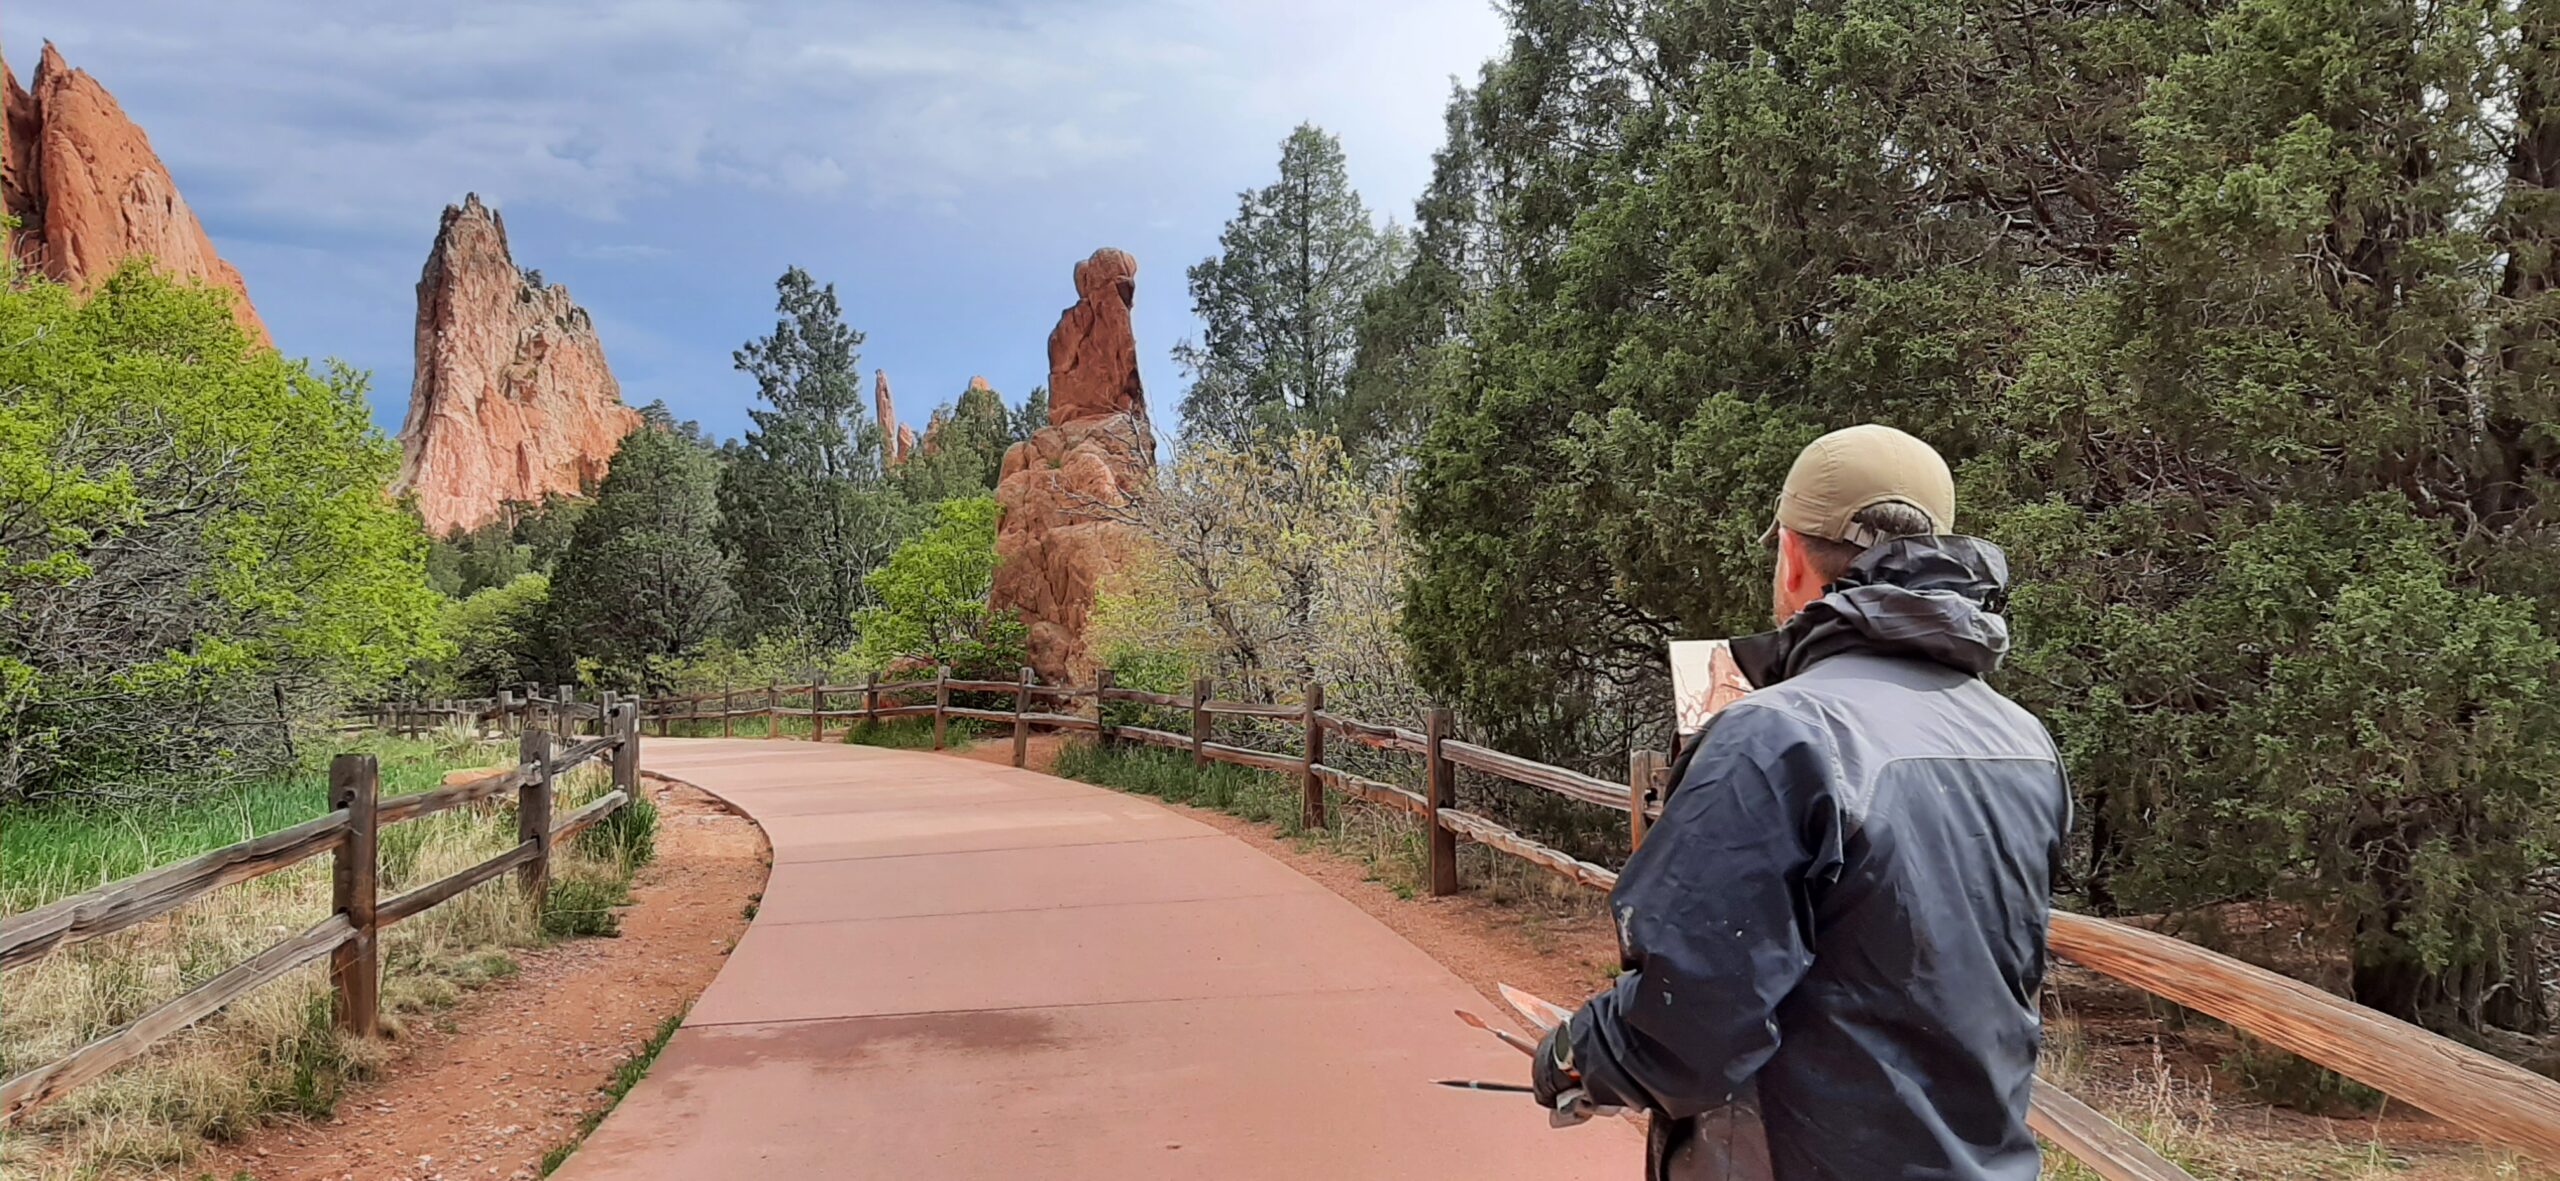 Painting the Red Rocks along the paved trail that leads throughout the Garden of the Gods.